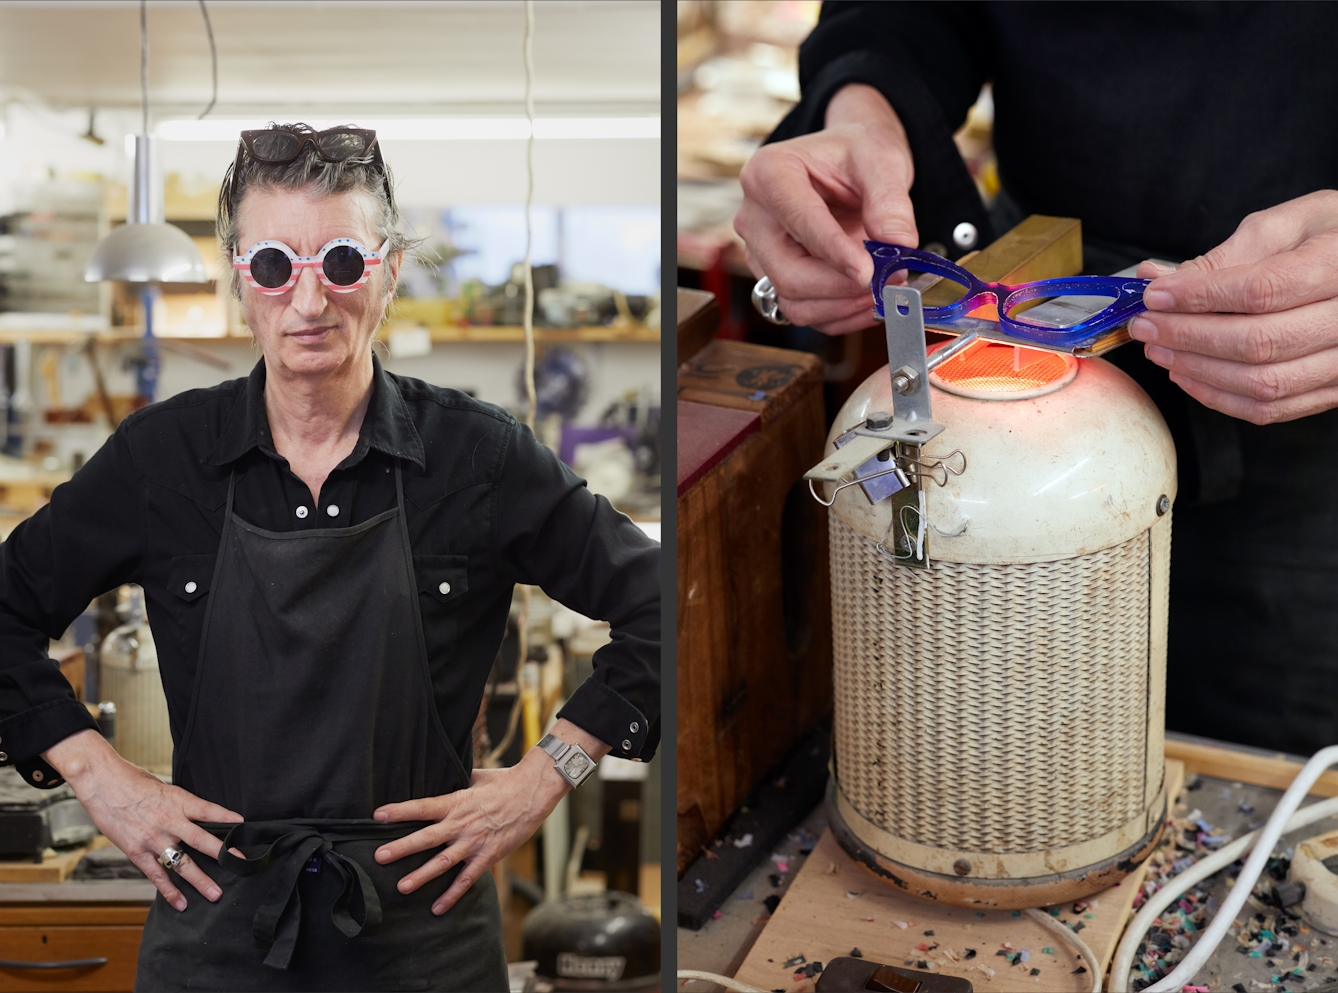 Photographic diptych. The image on the left shows a man in a black shirt and apron standing with his hands on his hips looking to camera. He is wearing a pair of round spectacles which have red and white stripy frames. The image on the right shows a close up view a pair of blue spectacle frames being heated over a cylindrical heater.